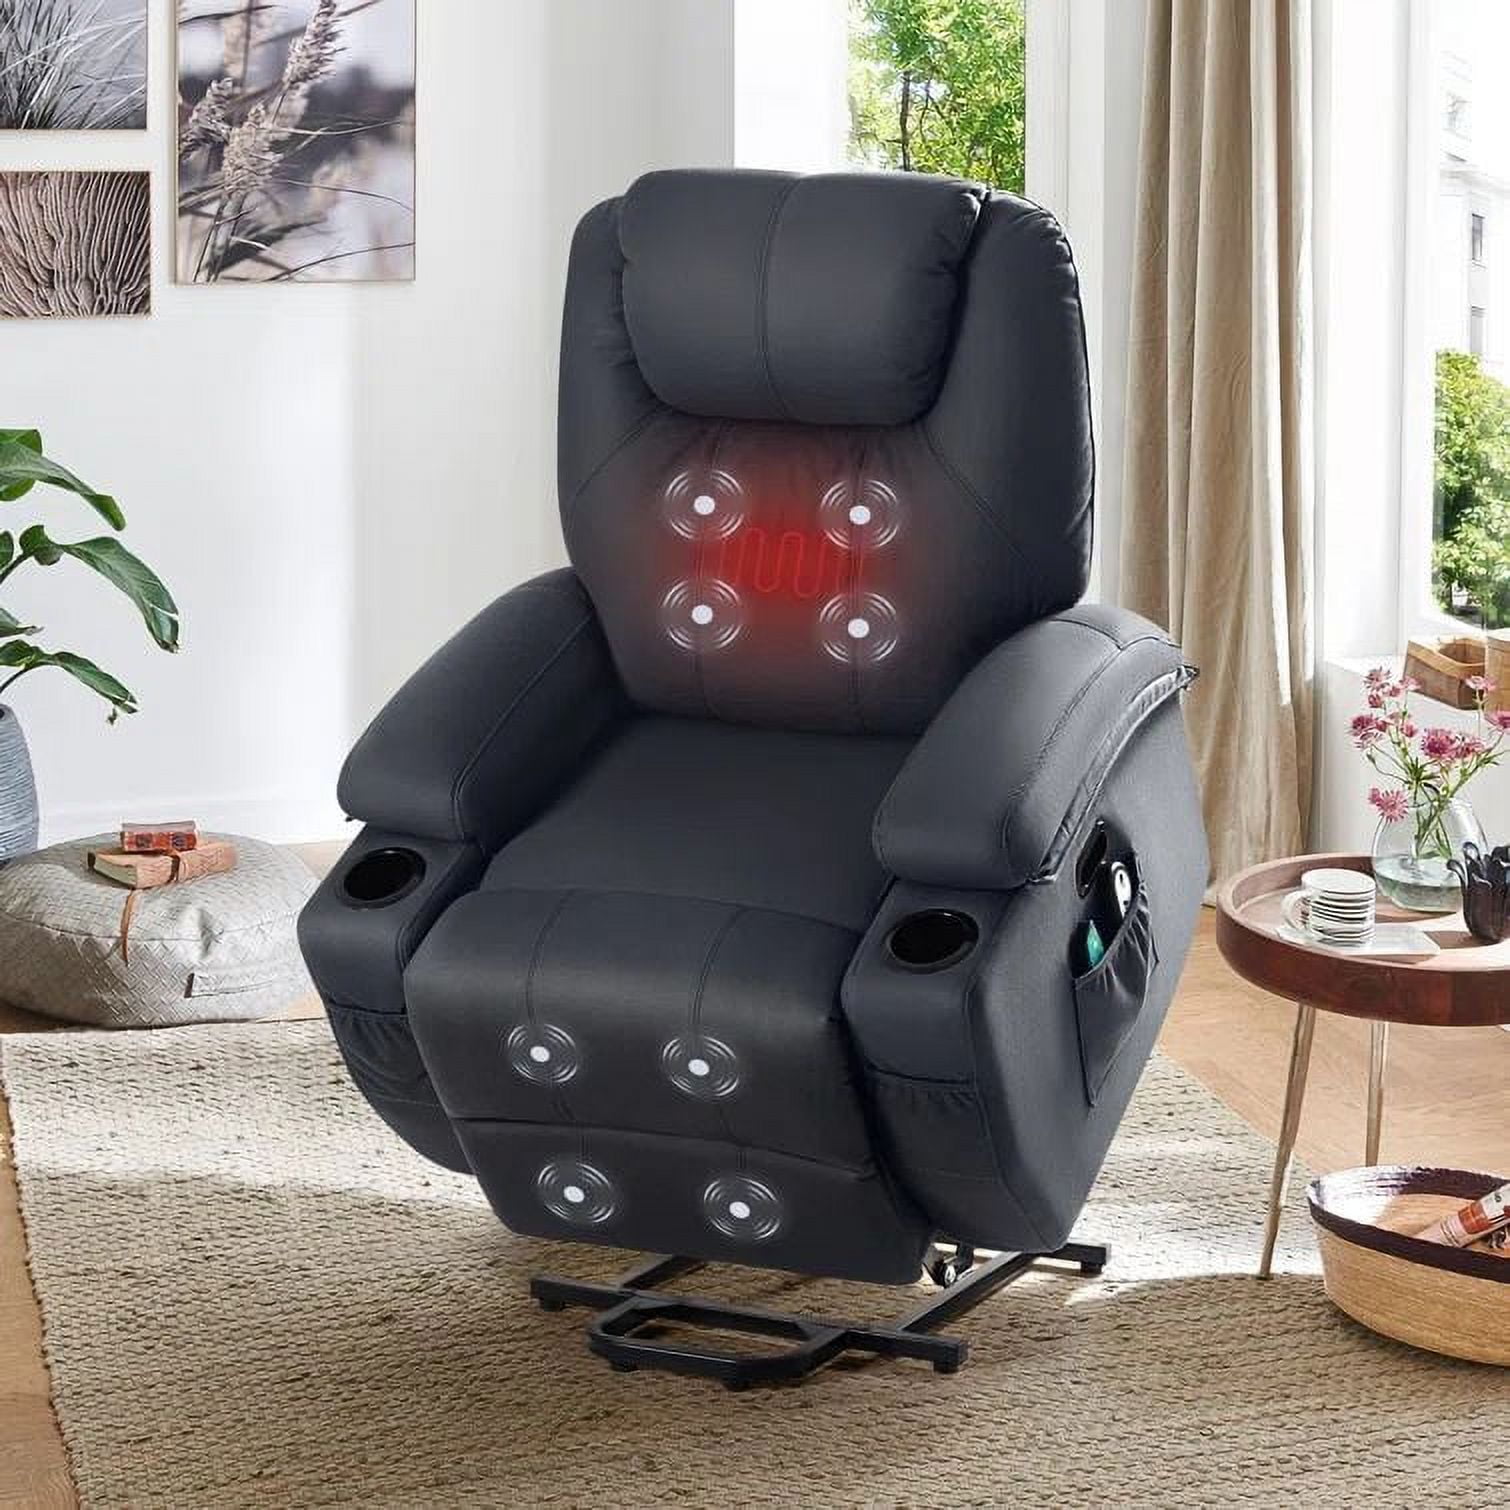 Homall Power Lift Recliner Chair with Massage and Heating PU Leather ...